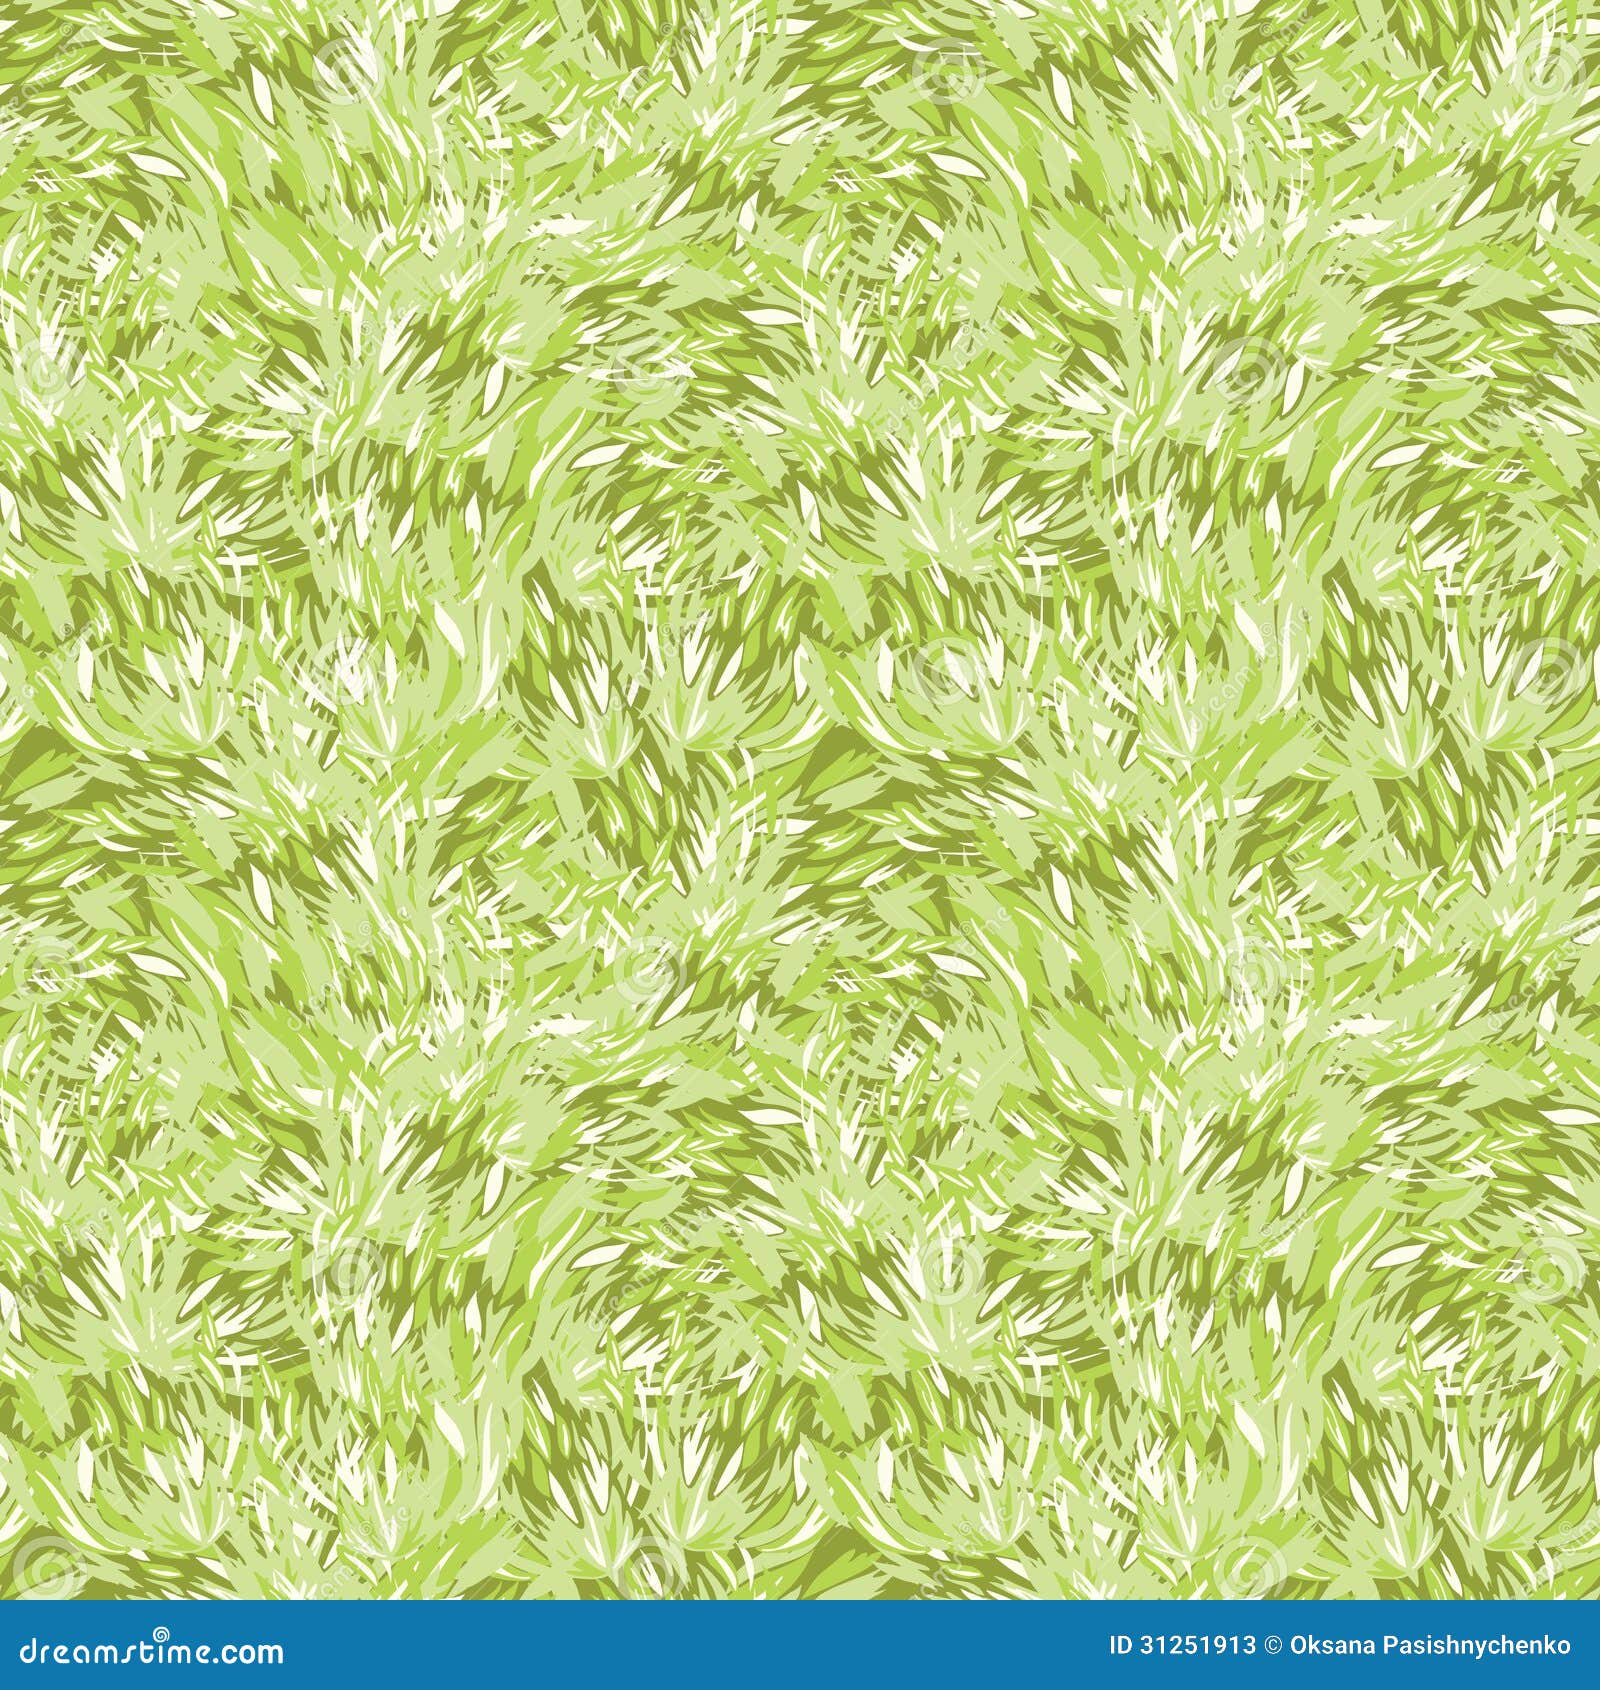 Green Grass Texture Seamless Pattern Background Stock Vector - Illustration  of nature, foliage: 31251913